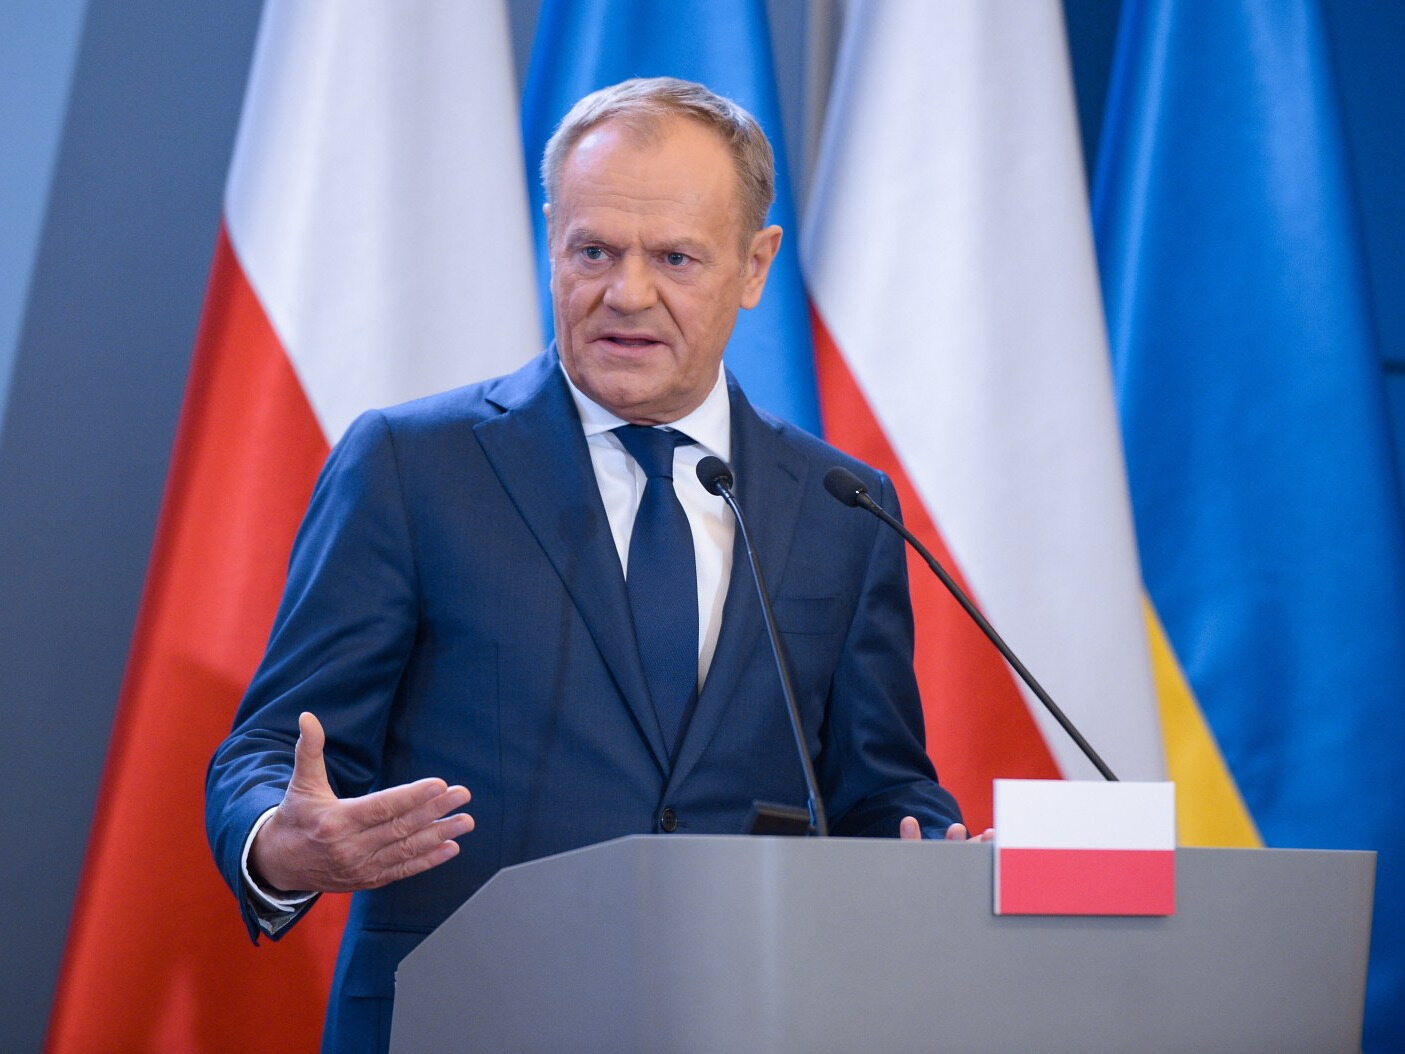 Tusk is not giving up after Duda's decision.  "We are implementing plan B"